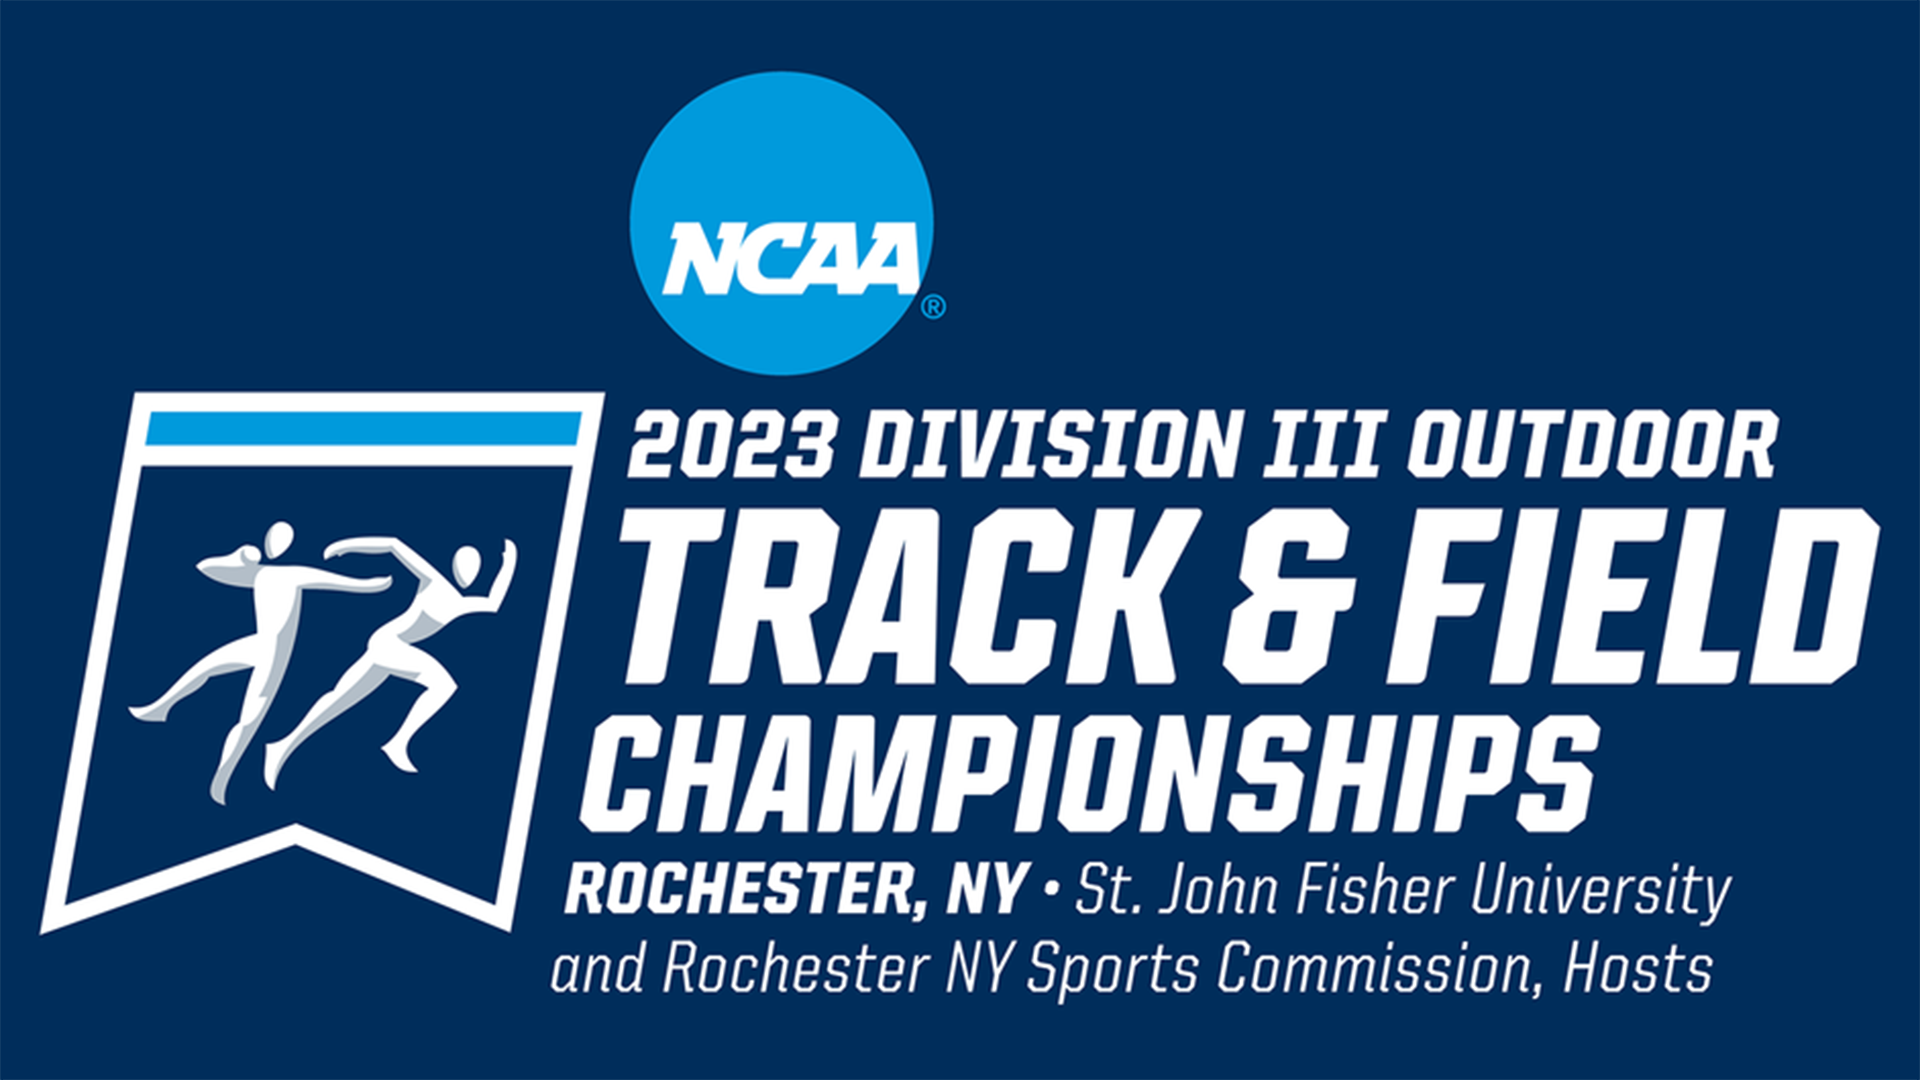 20 Individuals, Two Relays Qualify for NCAA Outdoor Track & Field Championships